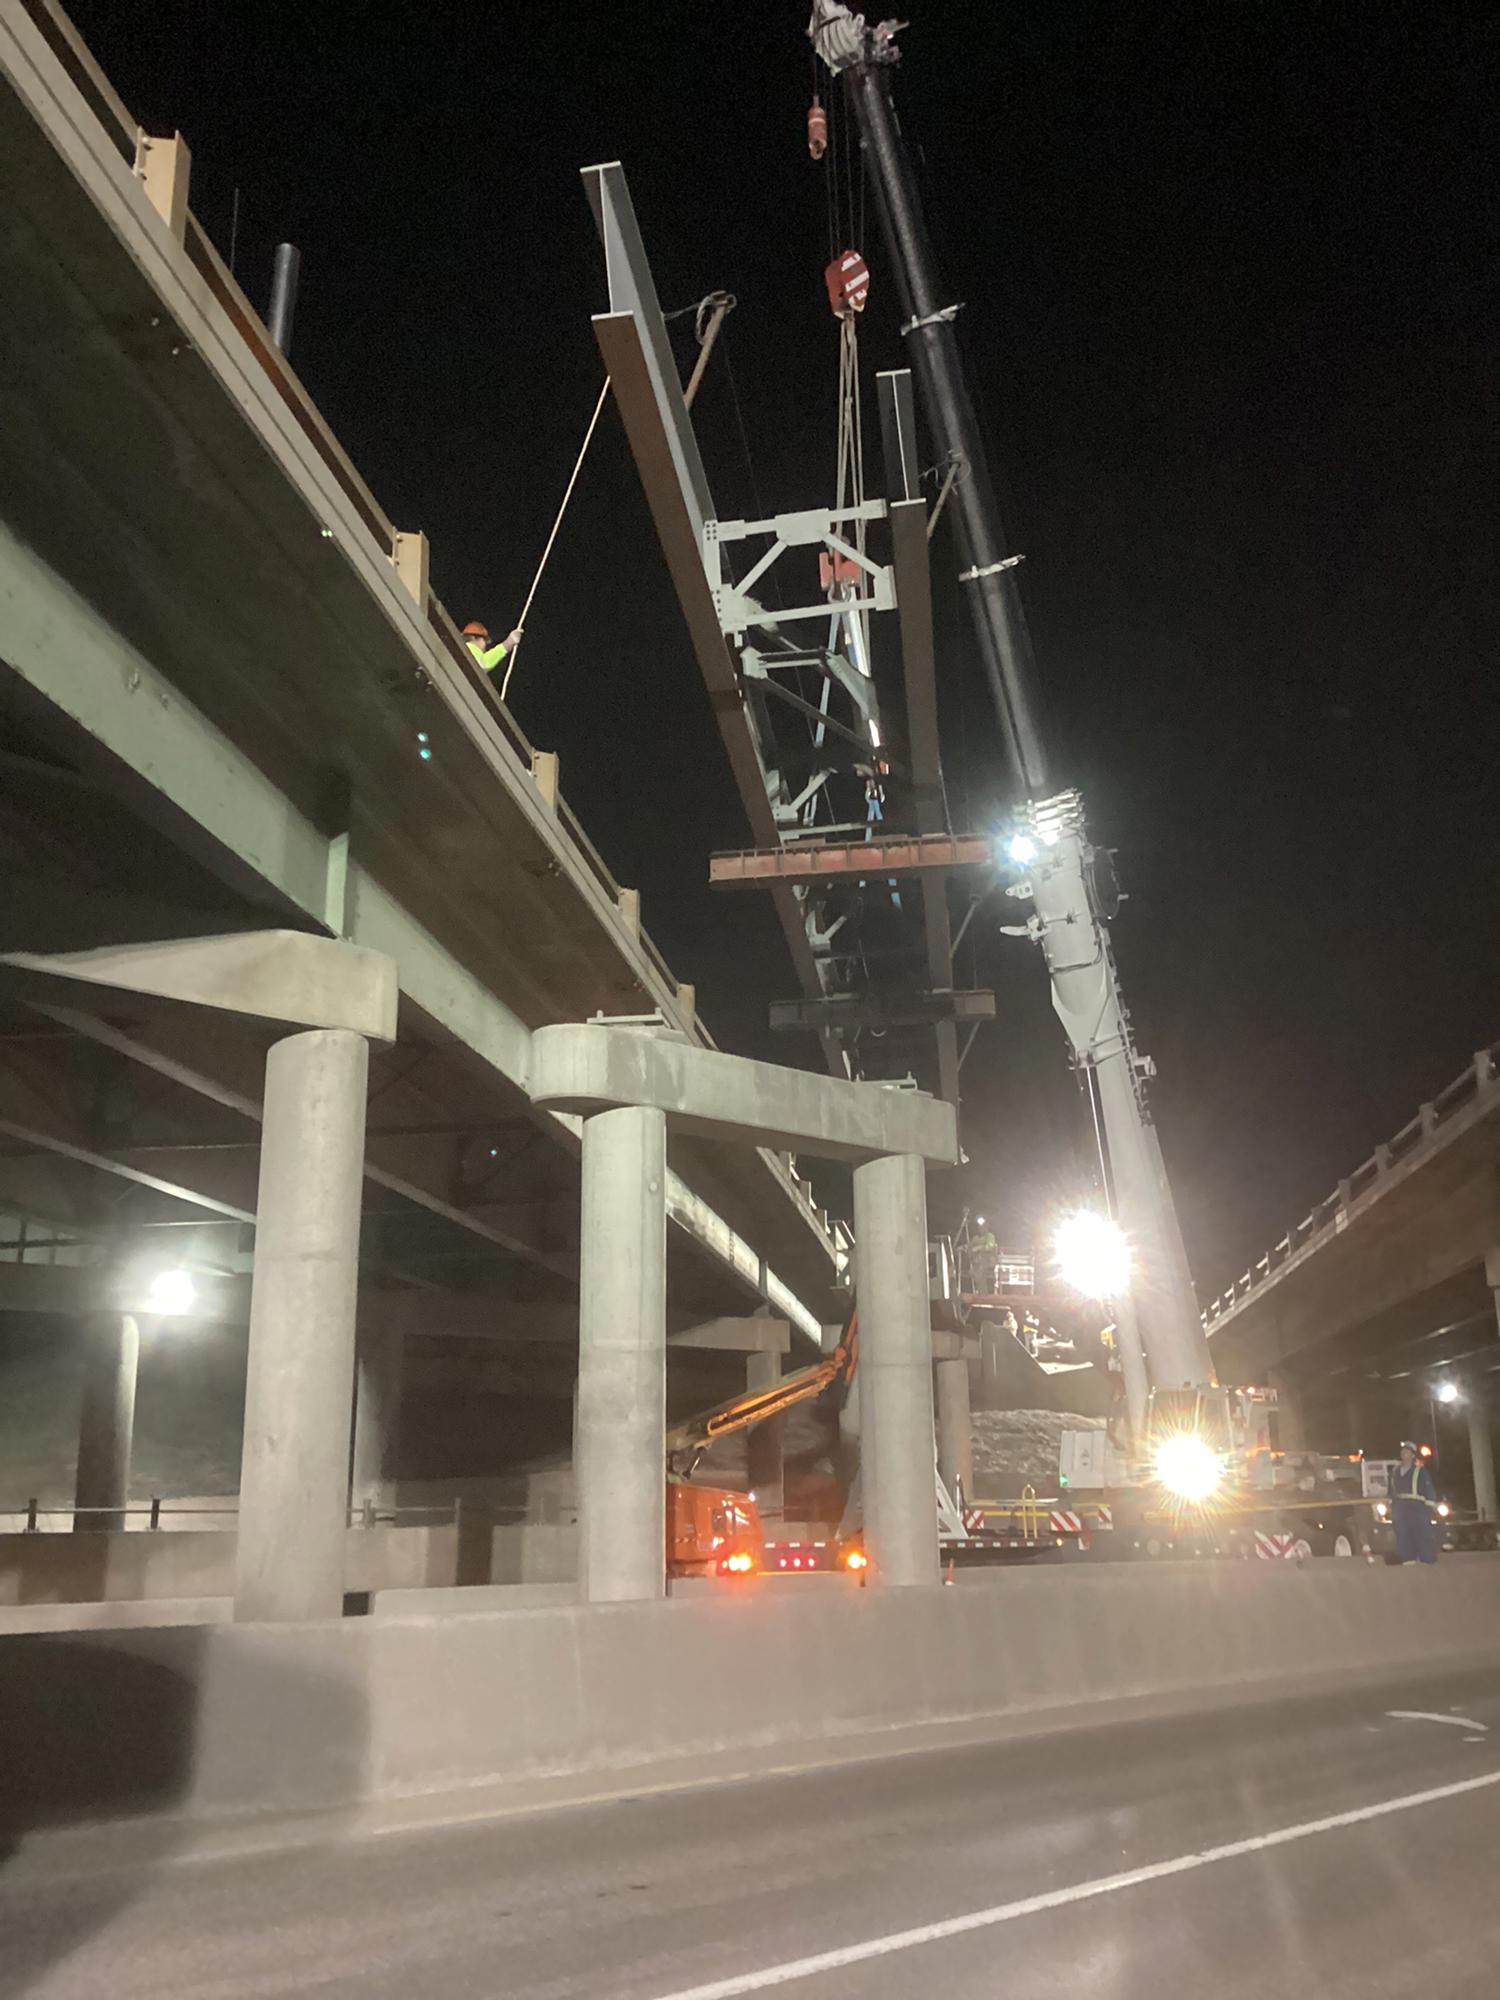 I-70_girder placement_Summit County.jpg detail image